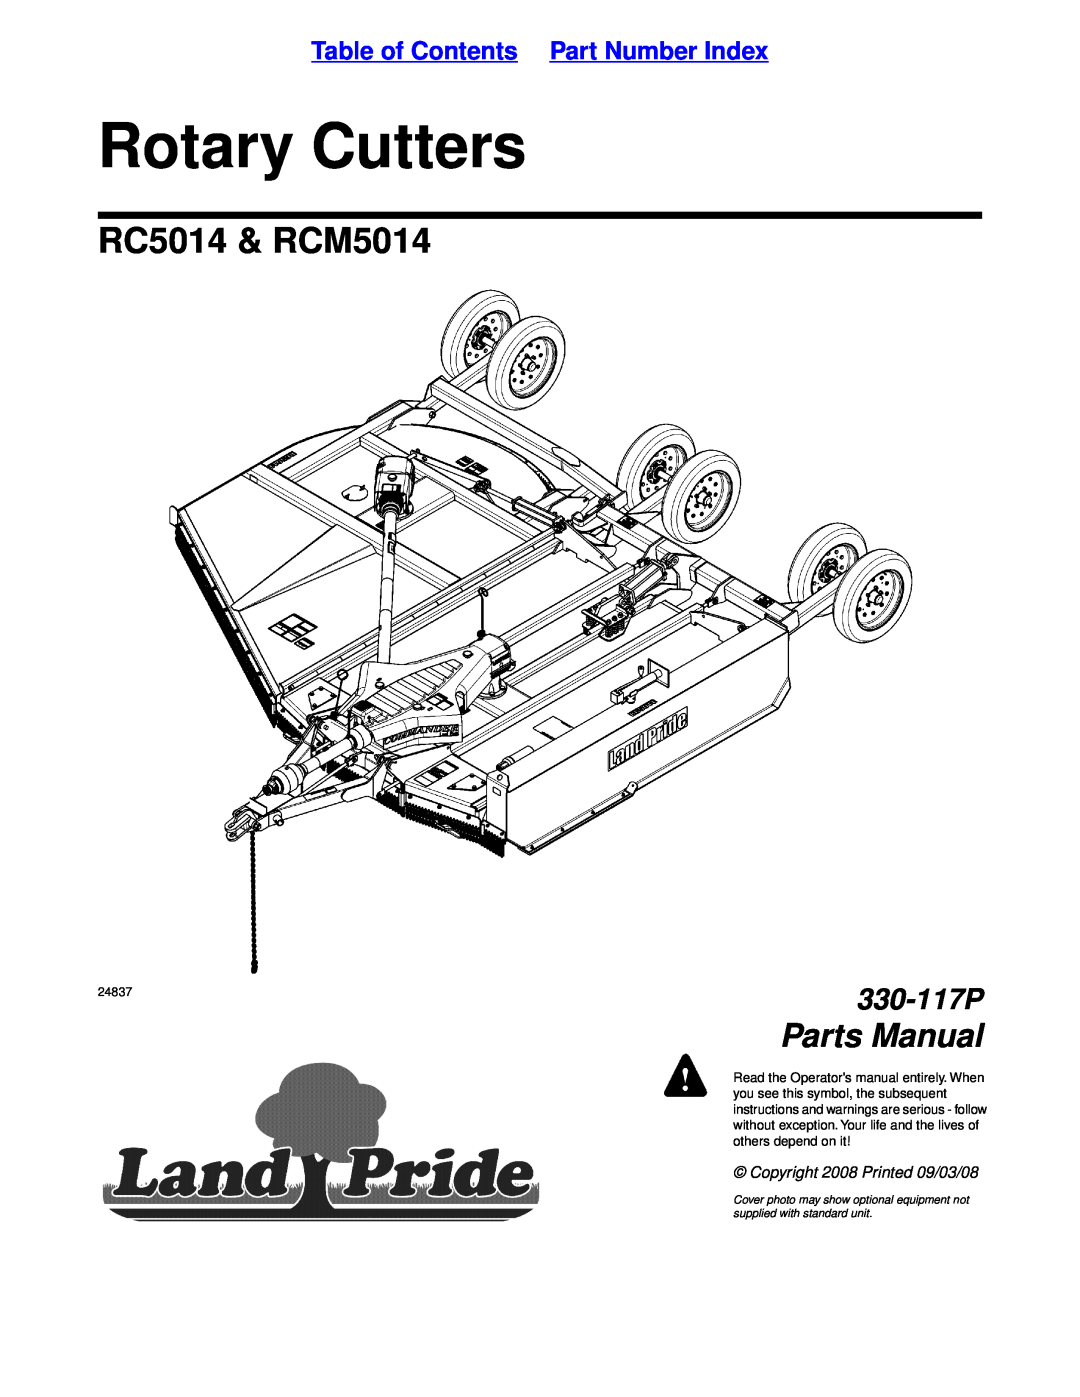 Land Pride manual Table of Contents Part Number Index, Rotary Cutters, RC5014 & RCM5014, Parts Manual, 330-117P 